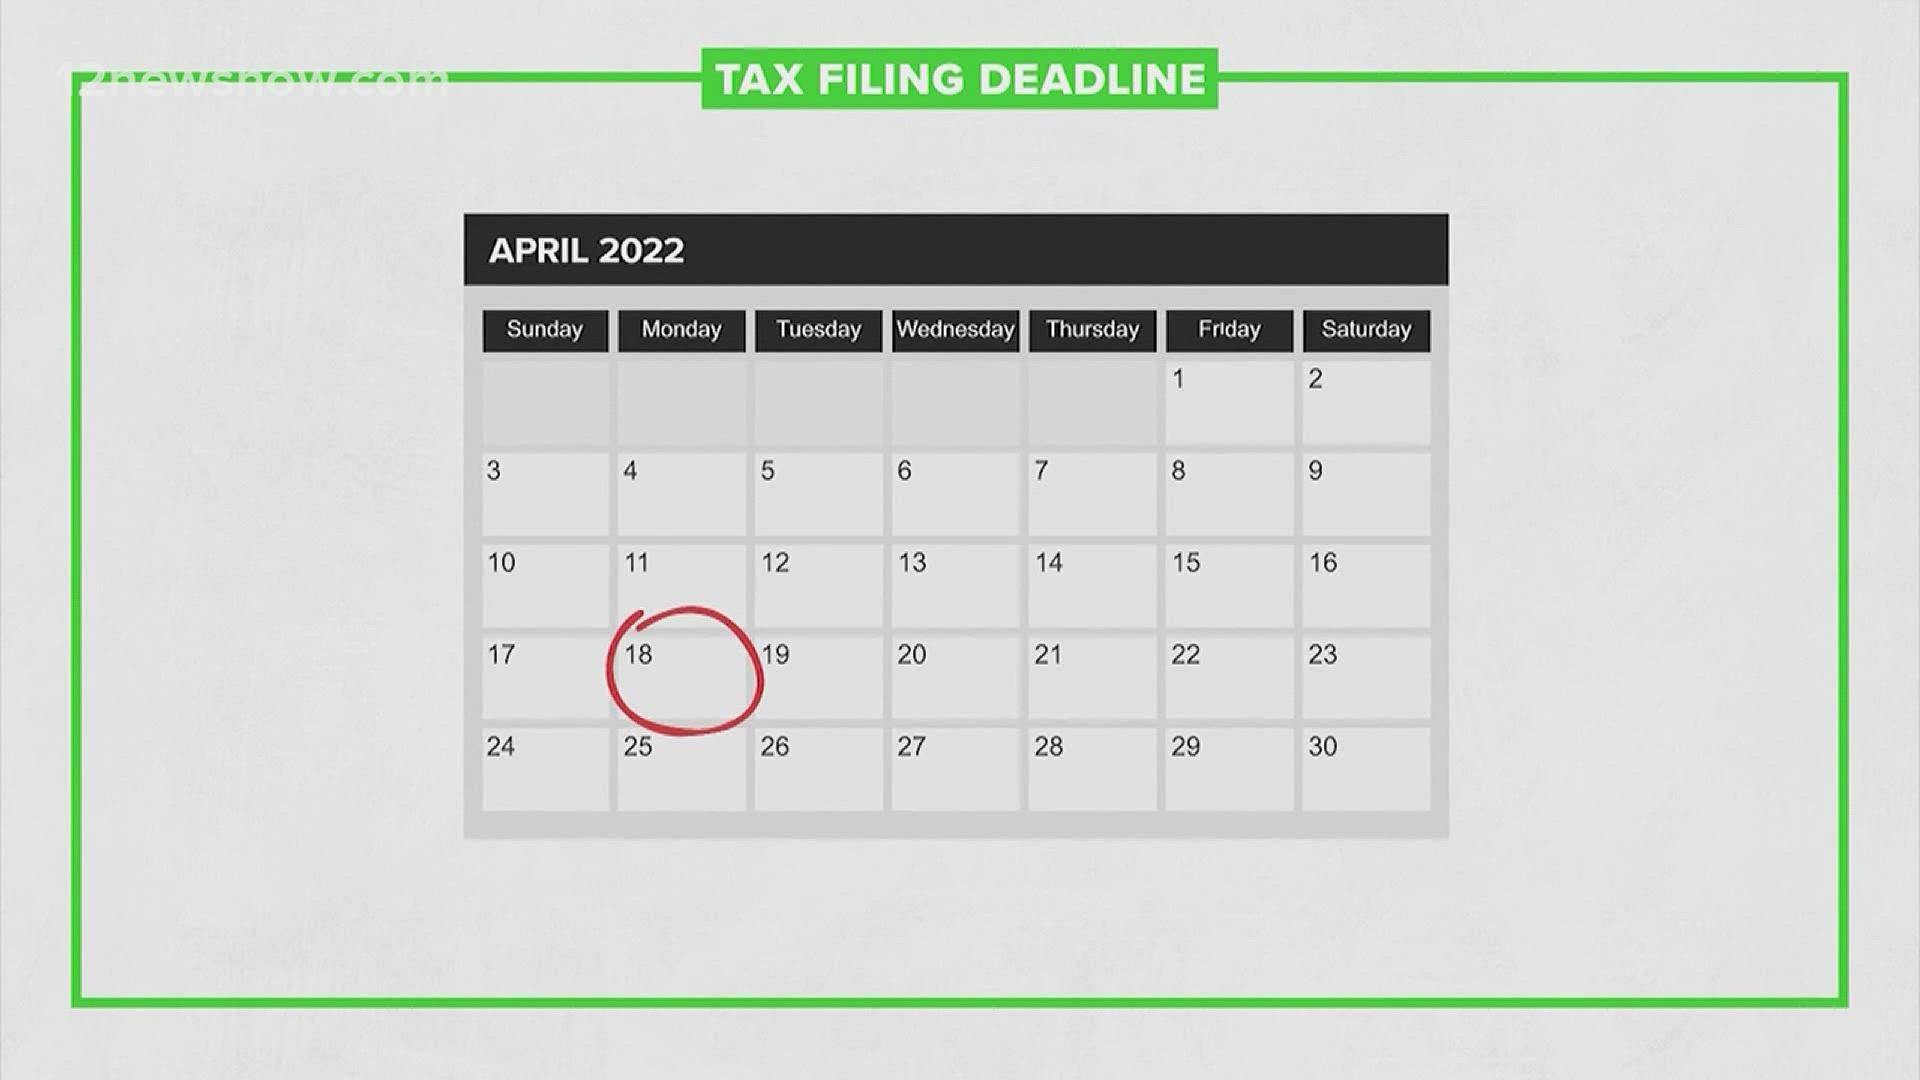 Monday is the deadline to file your tax returns.